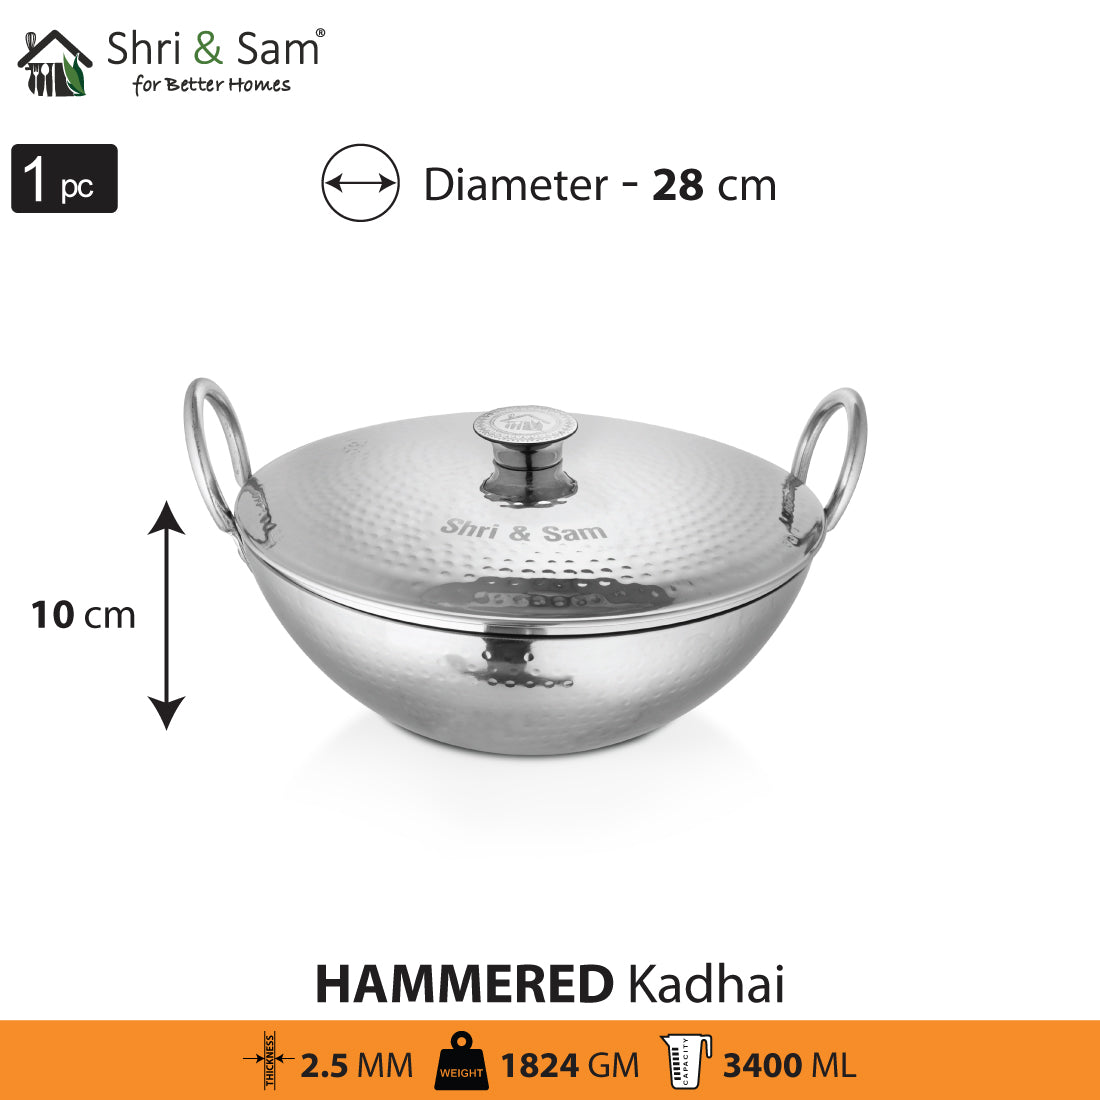 Stainless Steel Heavy Weight Hammered Kadhai with SS Lid